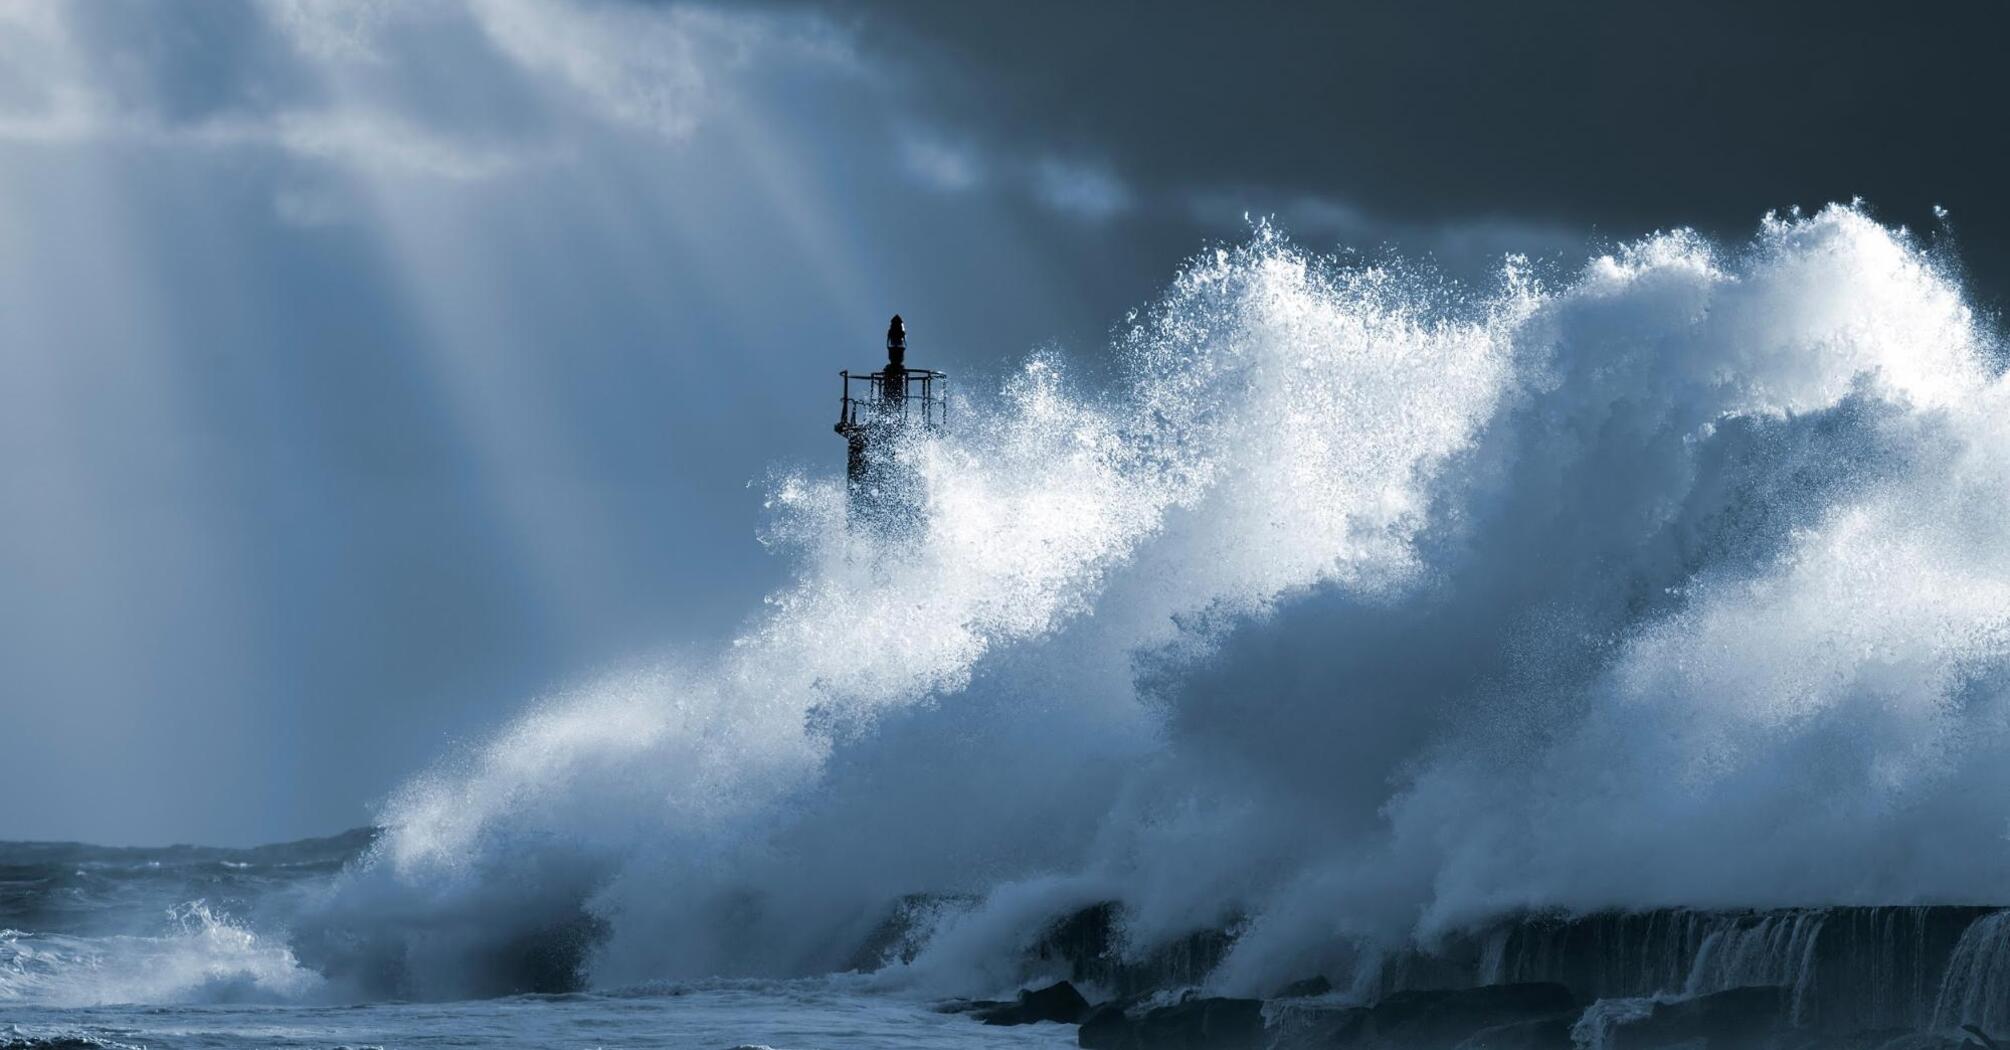 Powerful ocean waves crash against the lighthouse under a gloomy sky, creating a magnificent spray of water